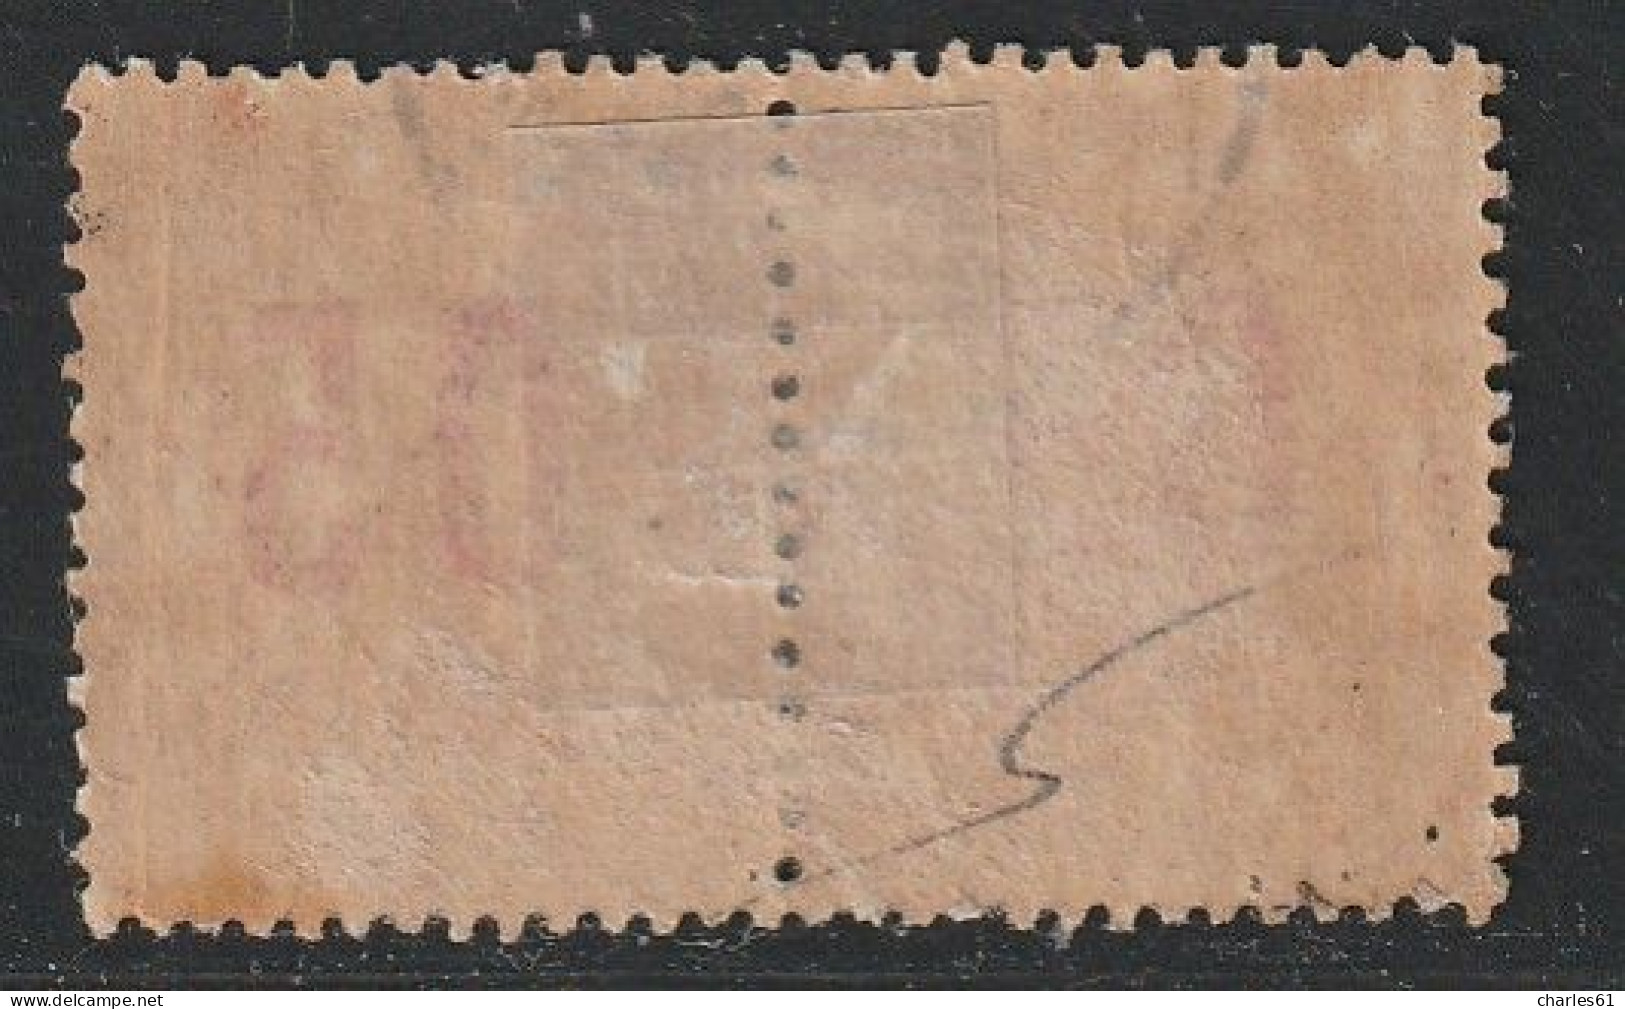 GRANDE COMORE - N°21A Obl (1912) Surcharge Espacée Tenant à Normal - Used Stamps